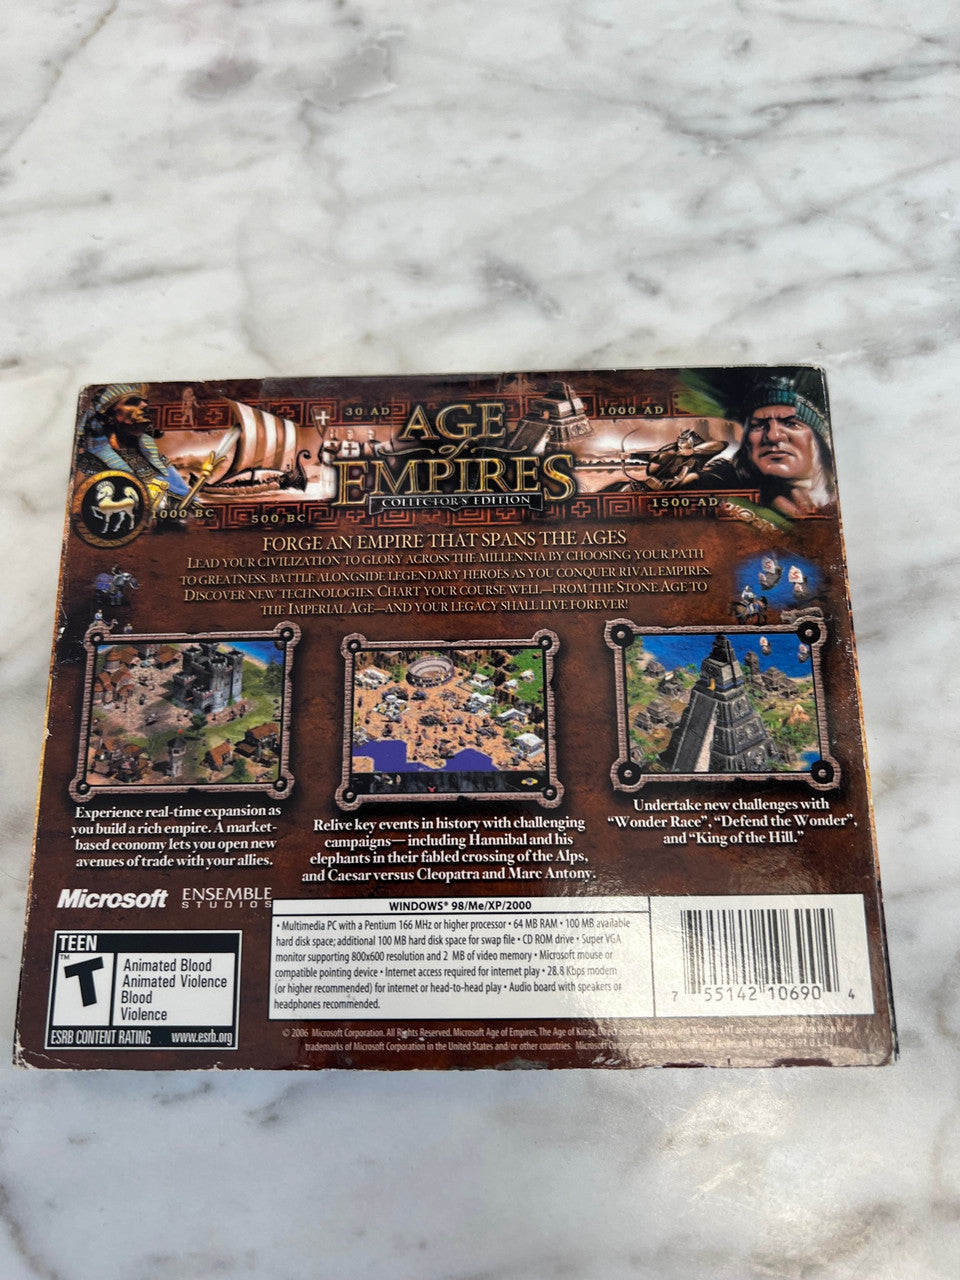 Age of Empires : Collector’s Edition Limited PC Game 3 CD-Rom Microsoft 2006